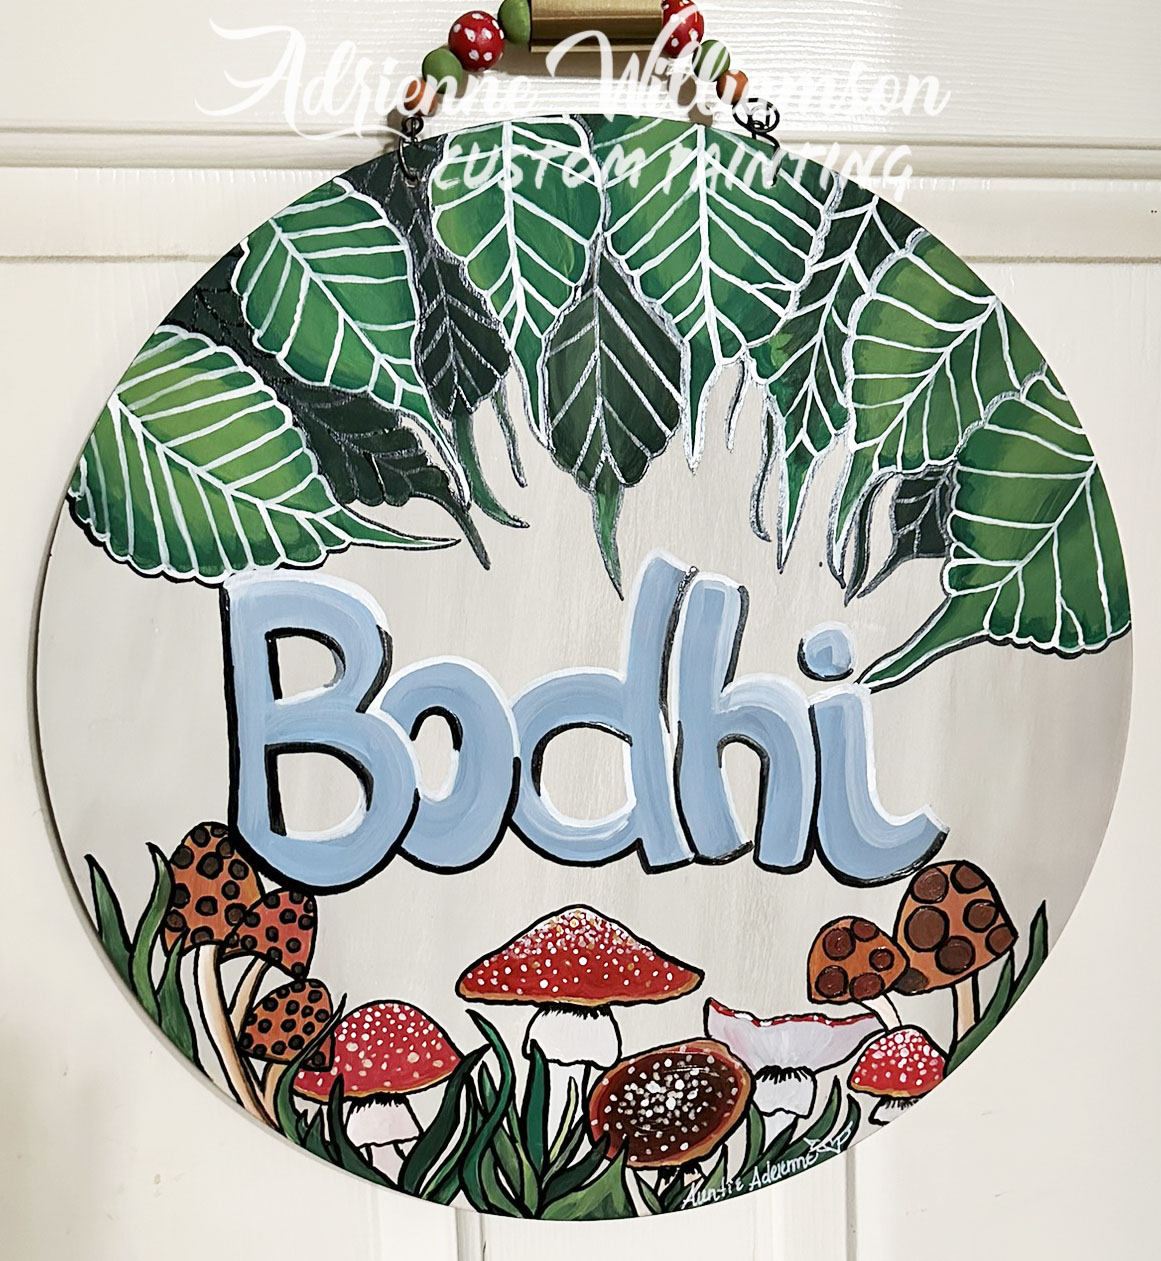 painted door sign hanging on interior door with mushrooms and a name